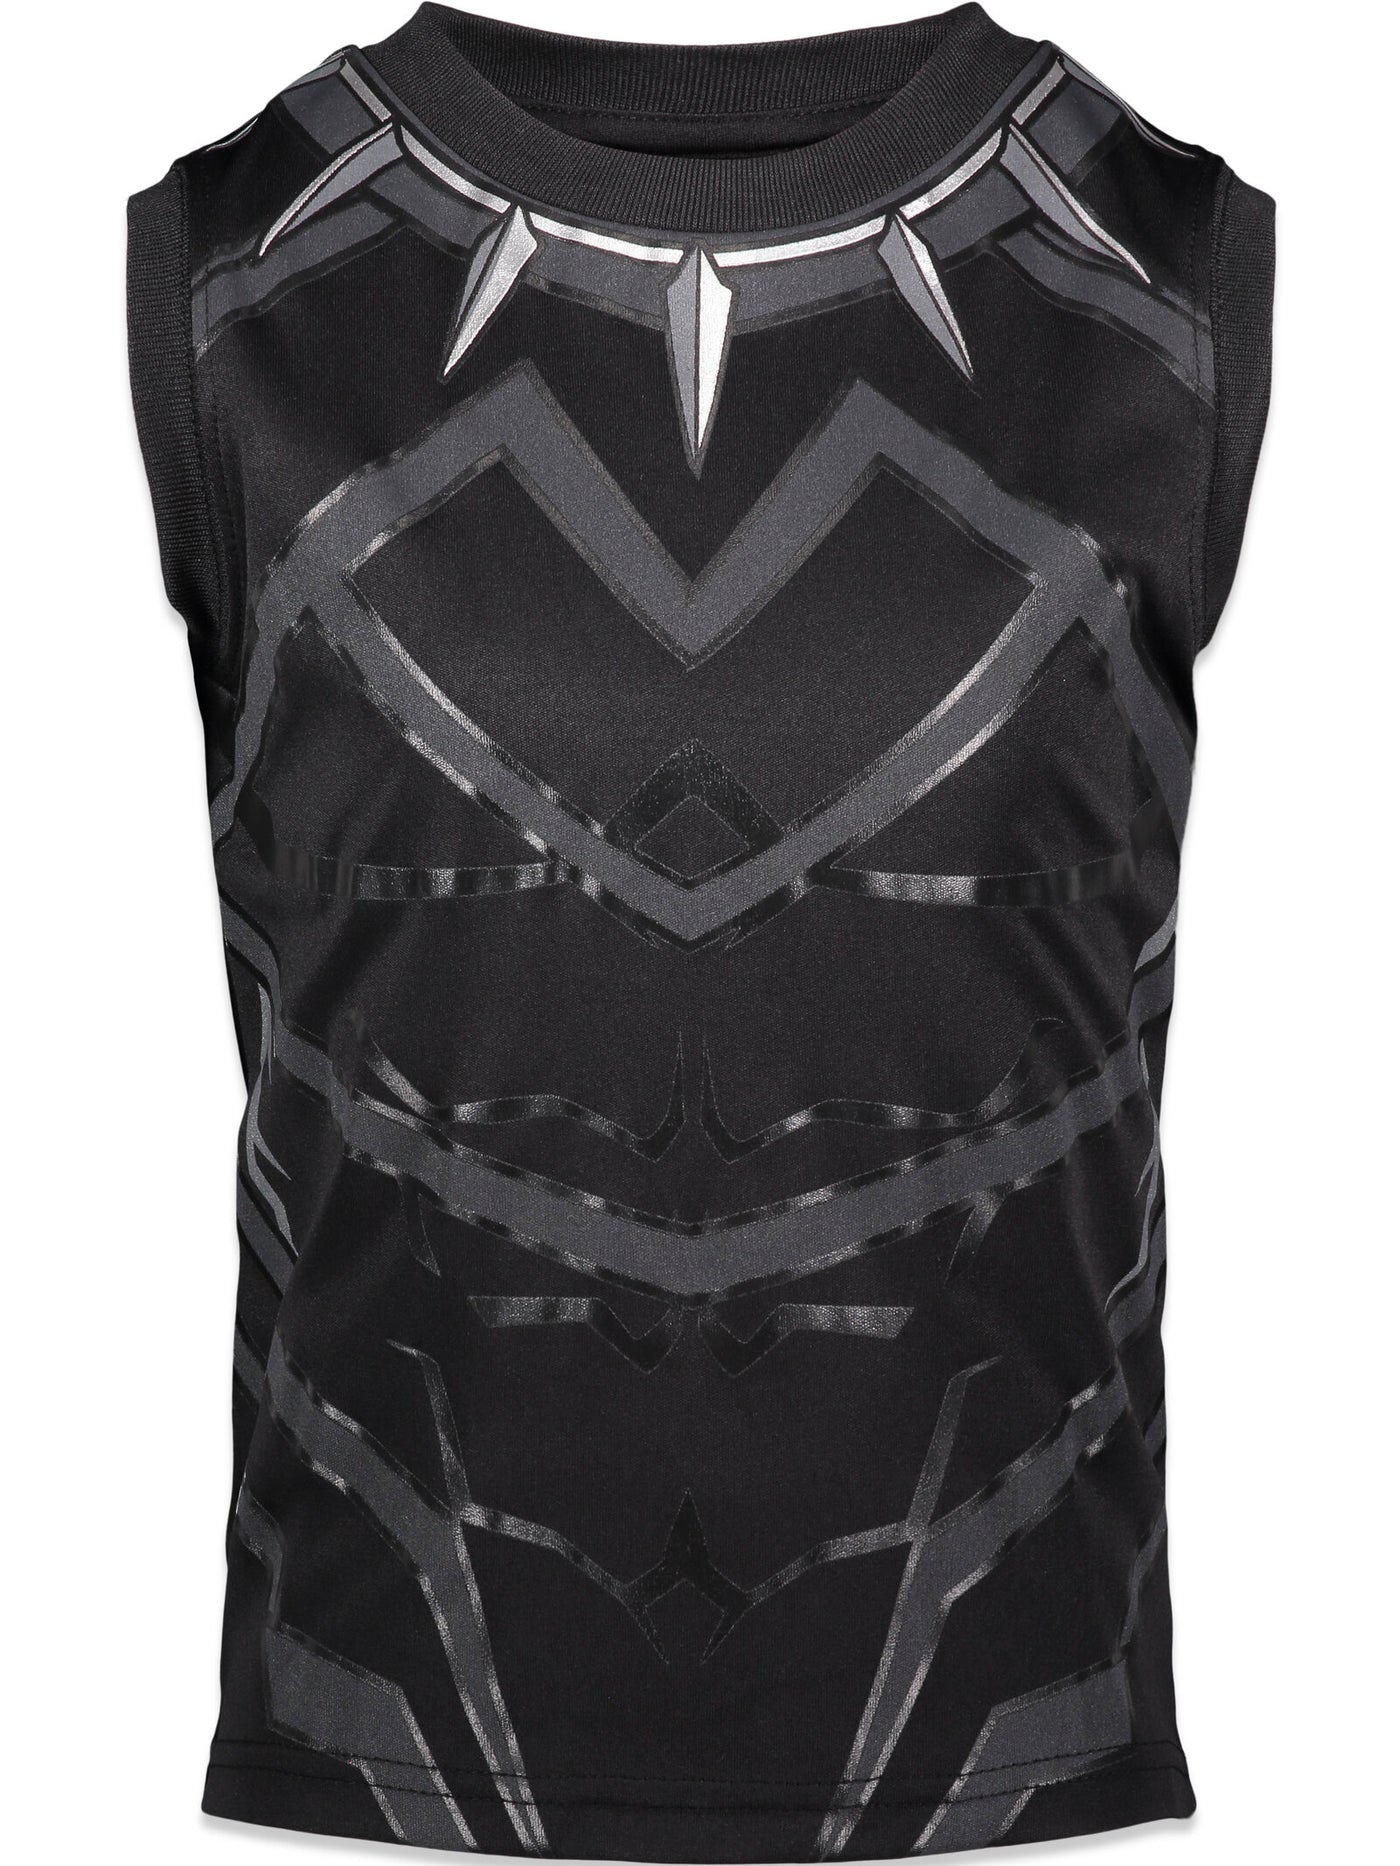 Marvel Avengers Black Panther Tank Top and Mesh Shorts Outfit Set